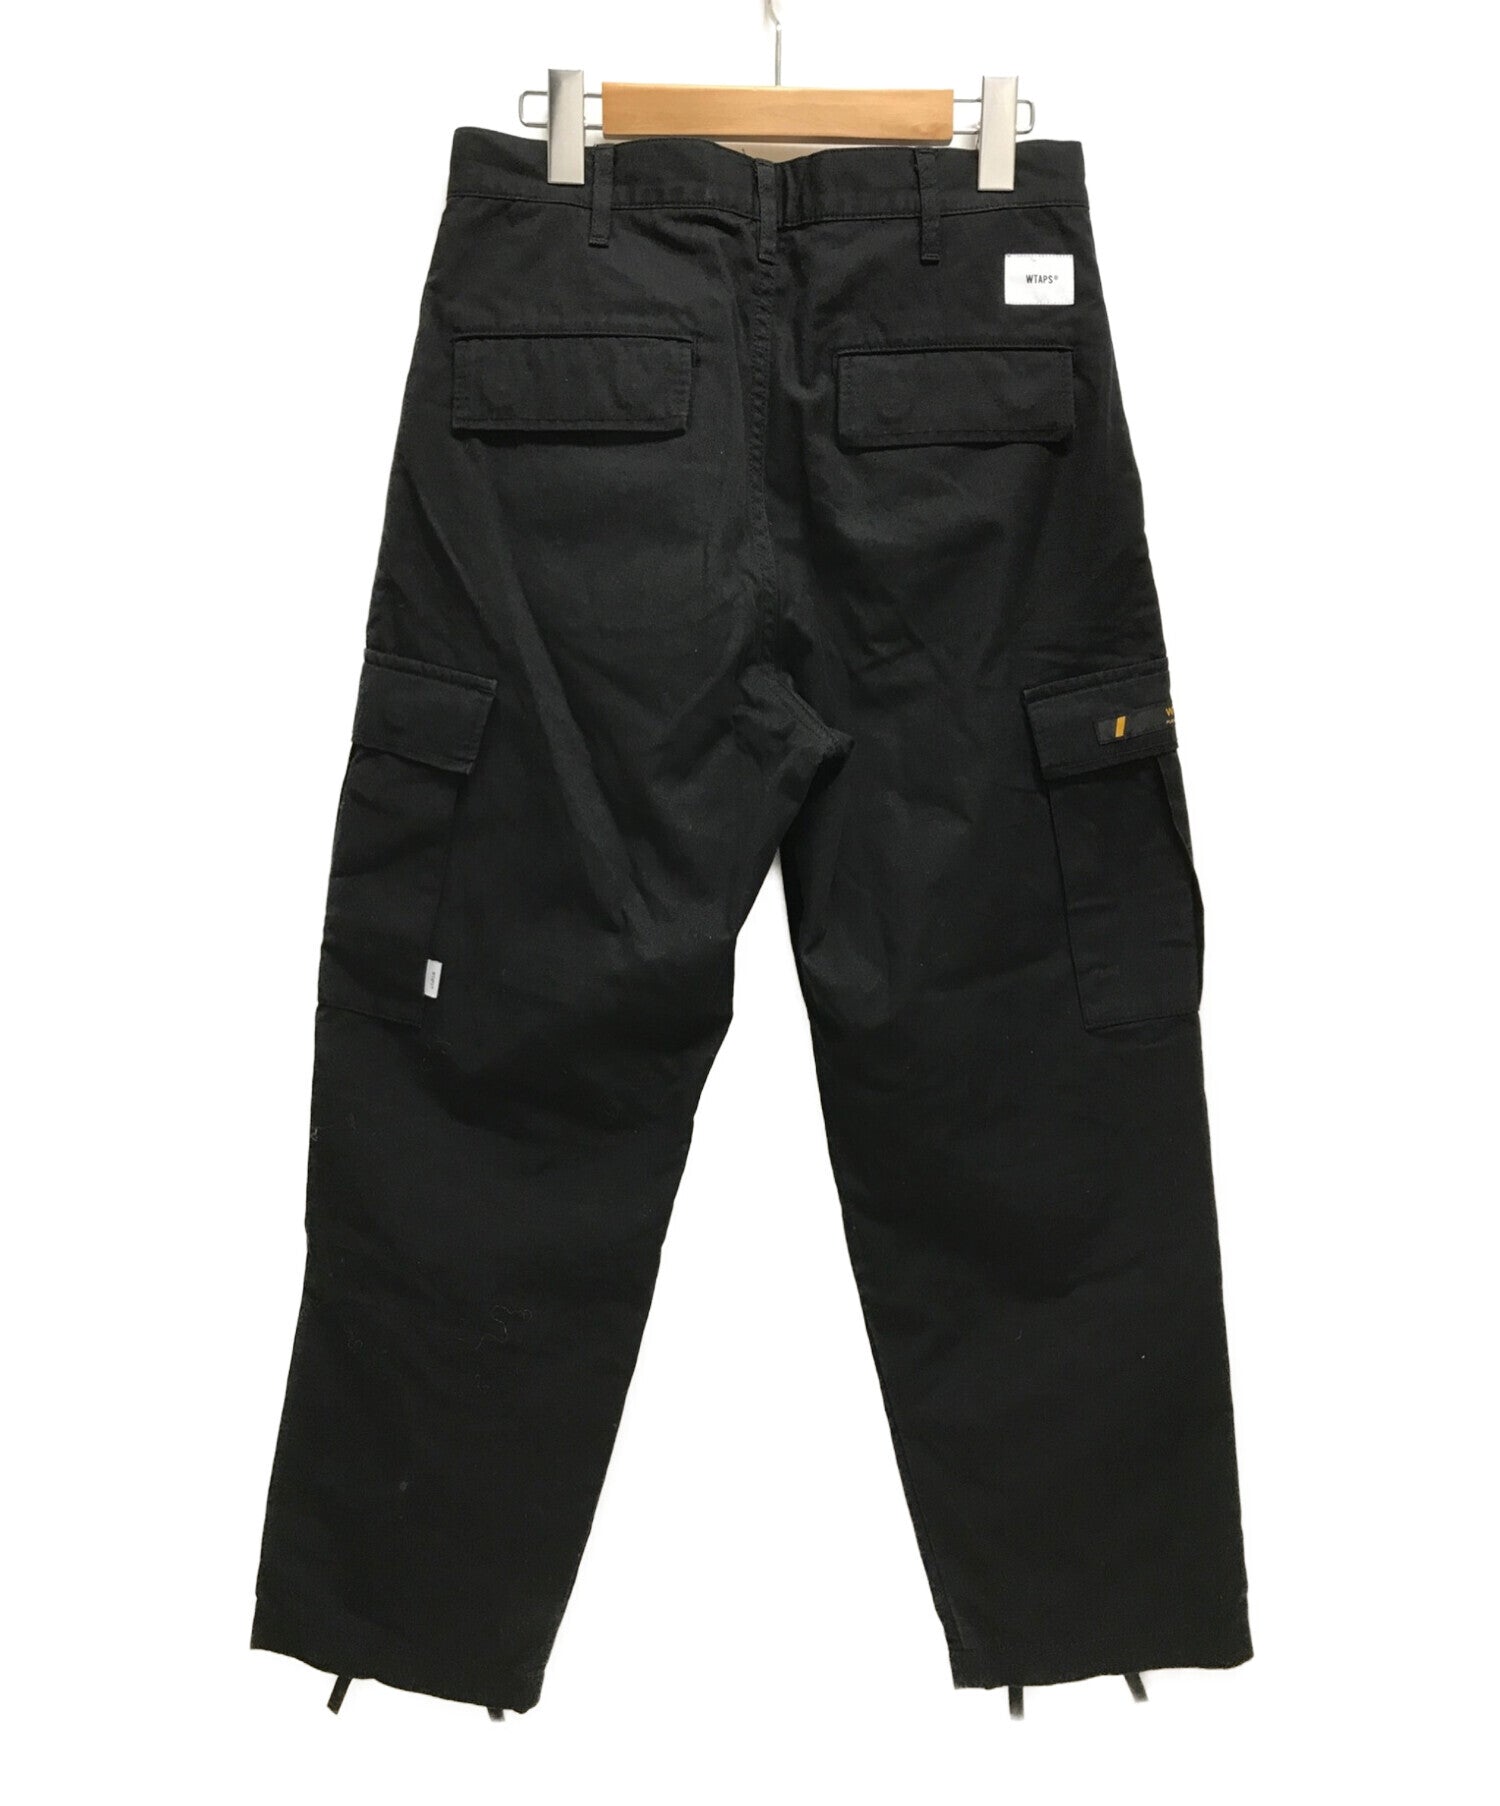 Pre-owned] WTAPS JUNGLE STOCK TROUSERS COTTON.RIPSTOP cargo pants ...